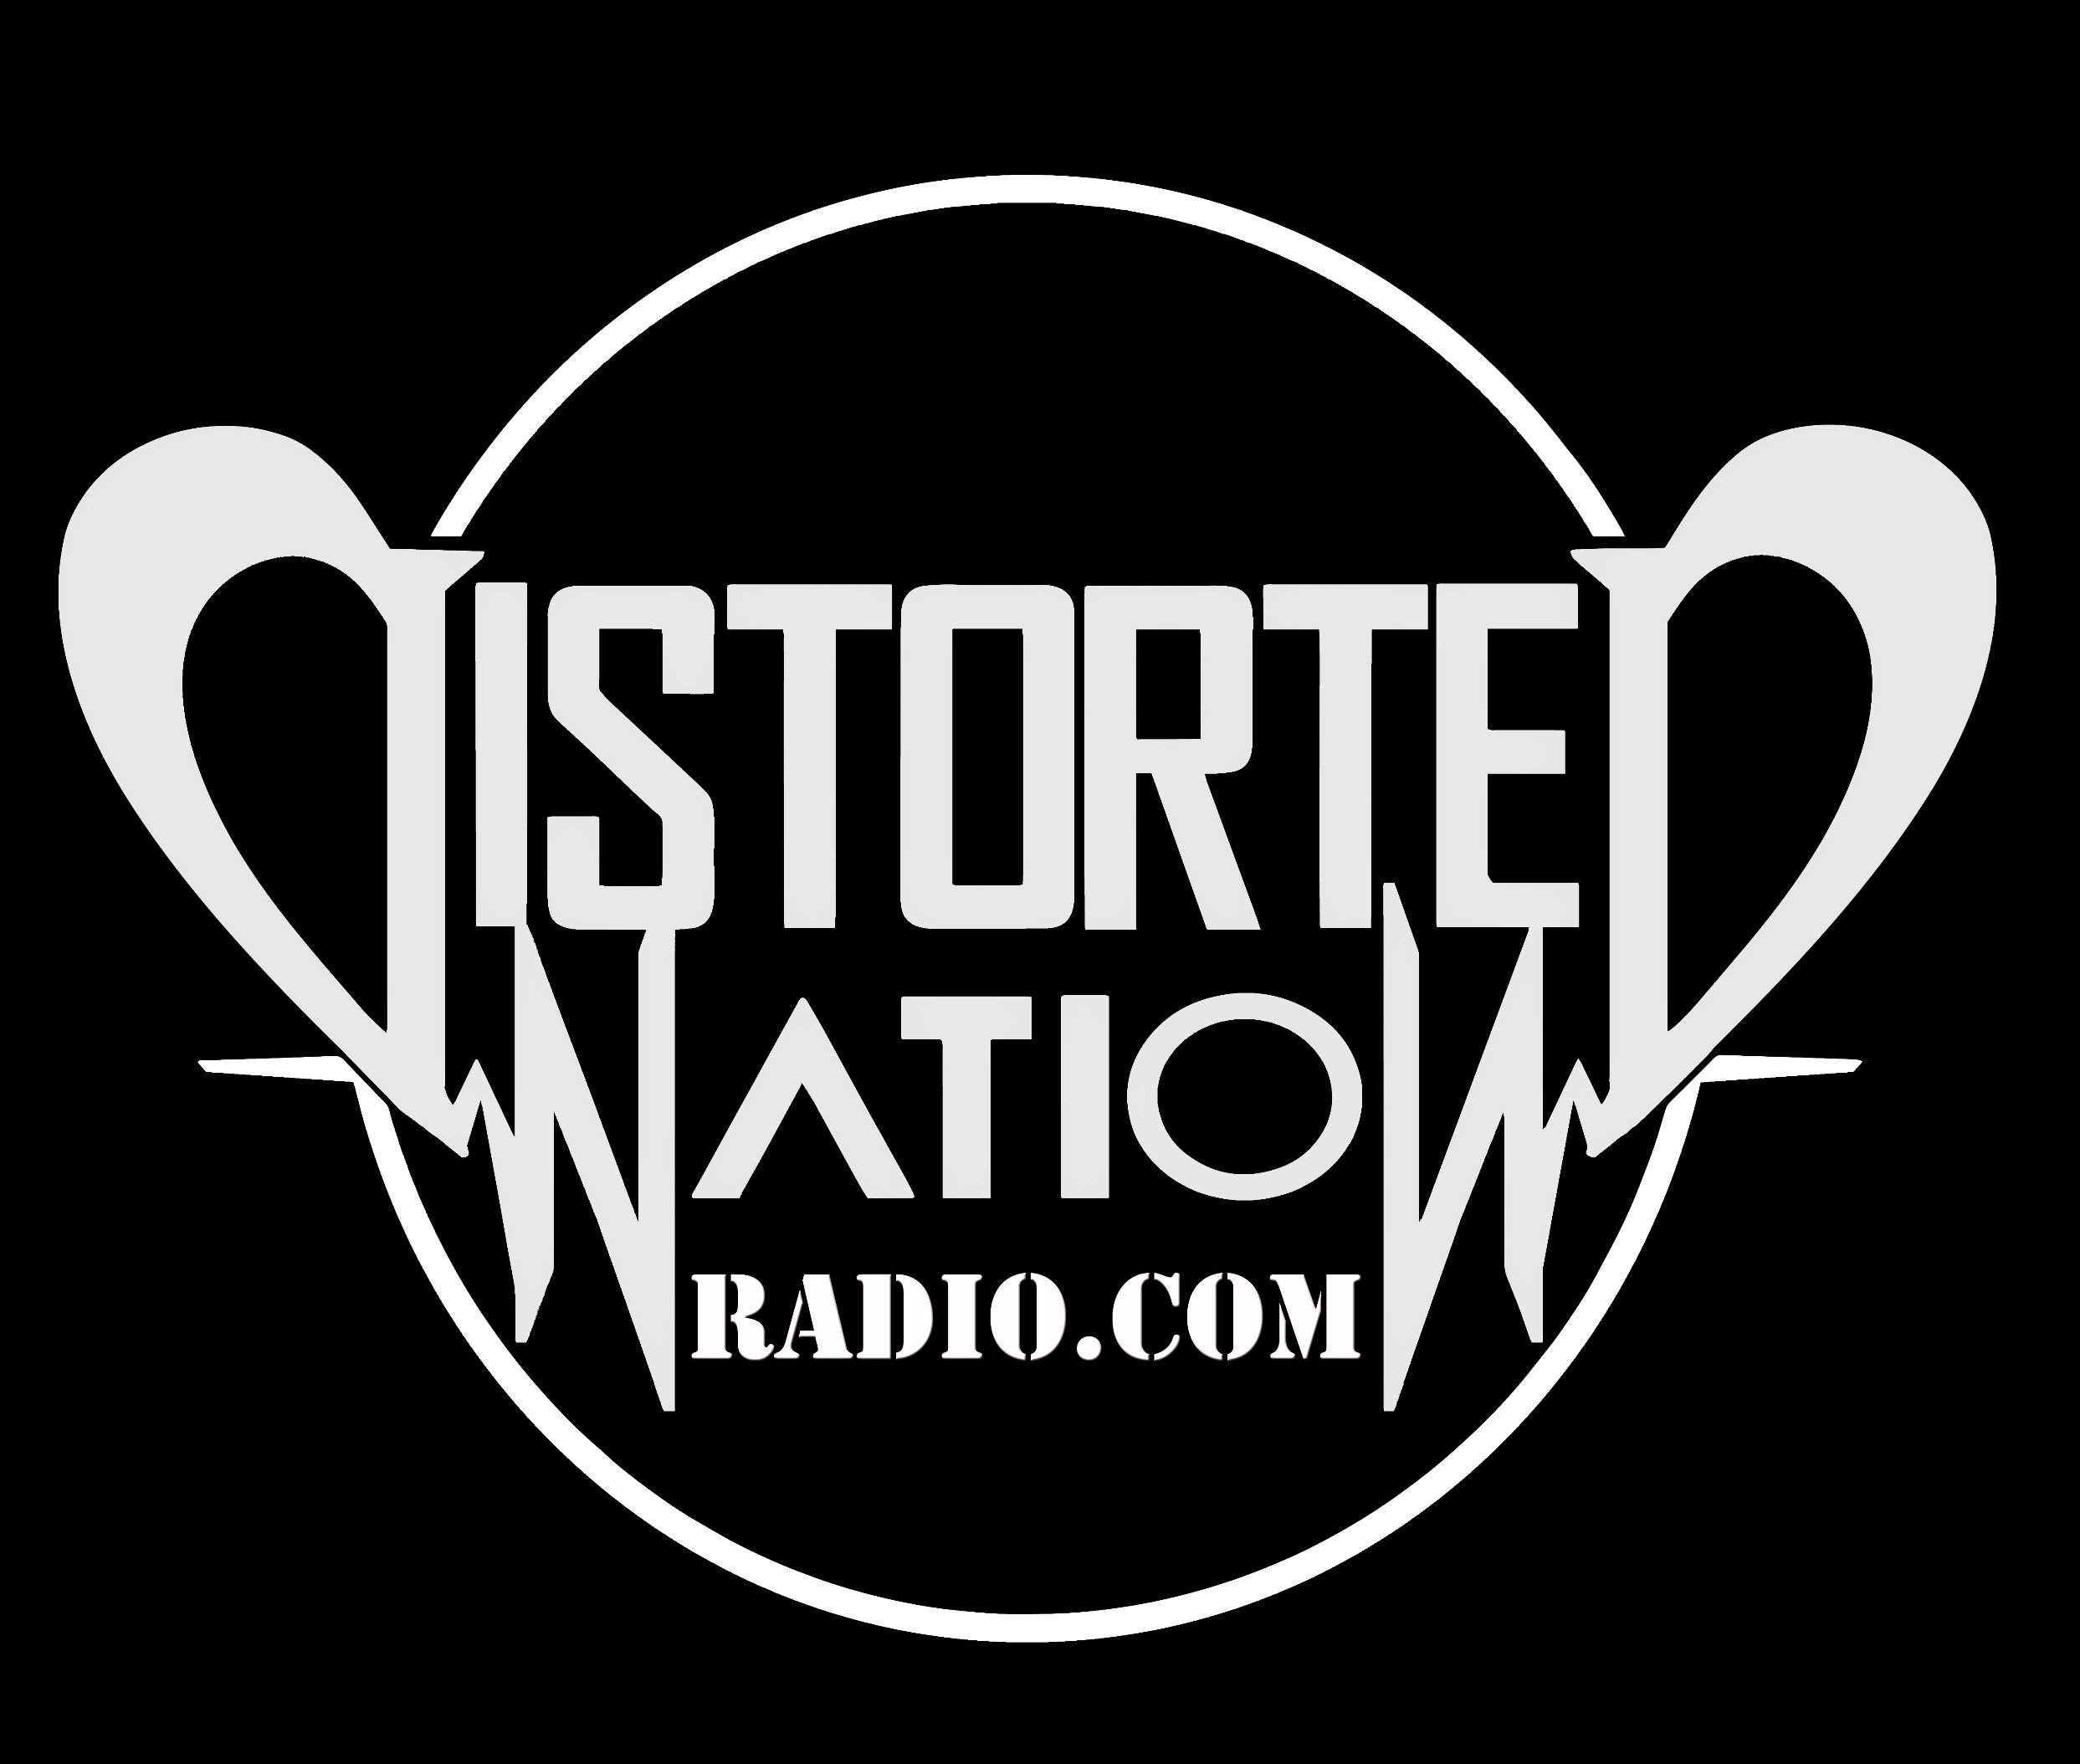 Distorted Nation Radio. DNation airs live on 96.5FM KUBU in Sacramento CA. podcast on Stitcher/iTunes/SoundCloud   
Taking Local To National Level!